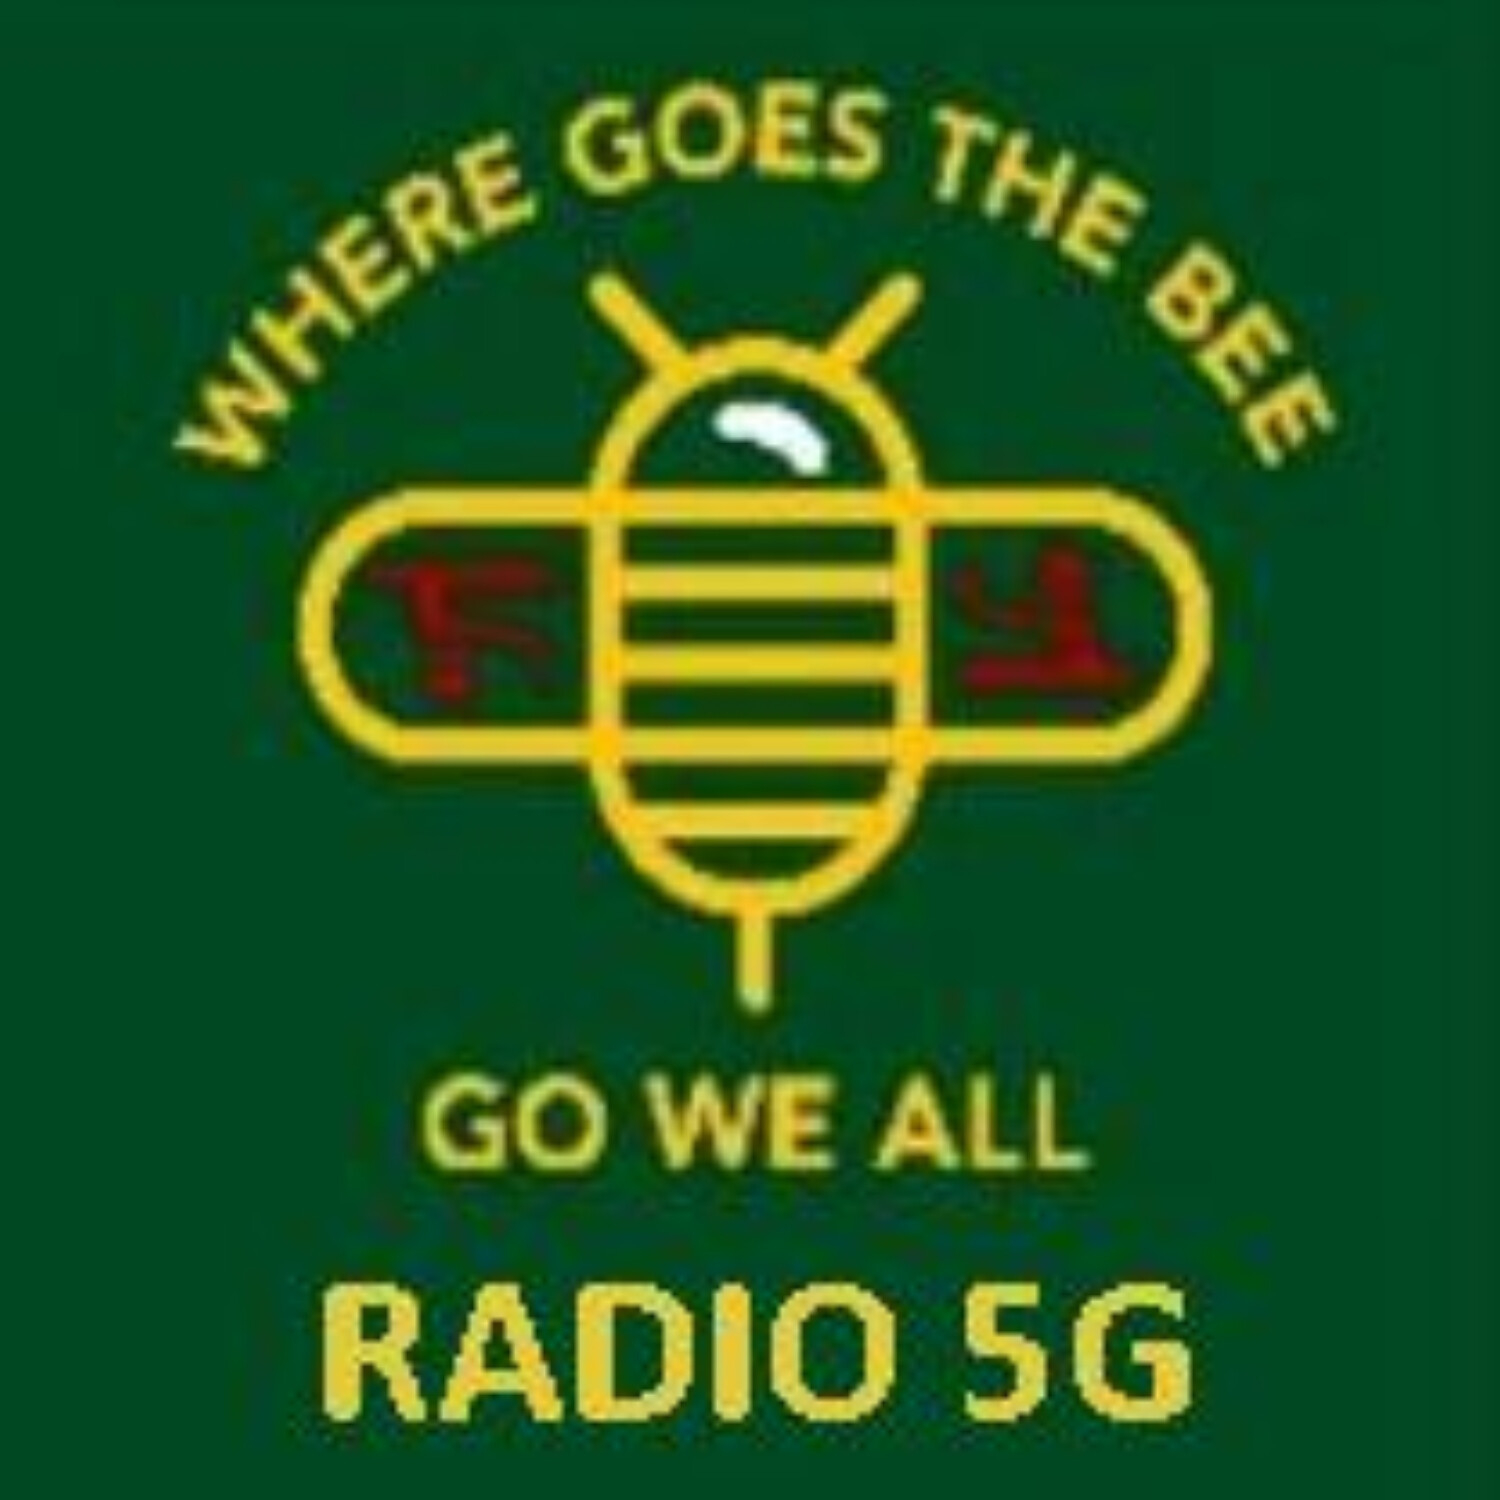 RADIO 5G 2/7/23 - Totalitarian Takeover of America